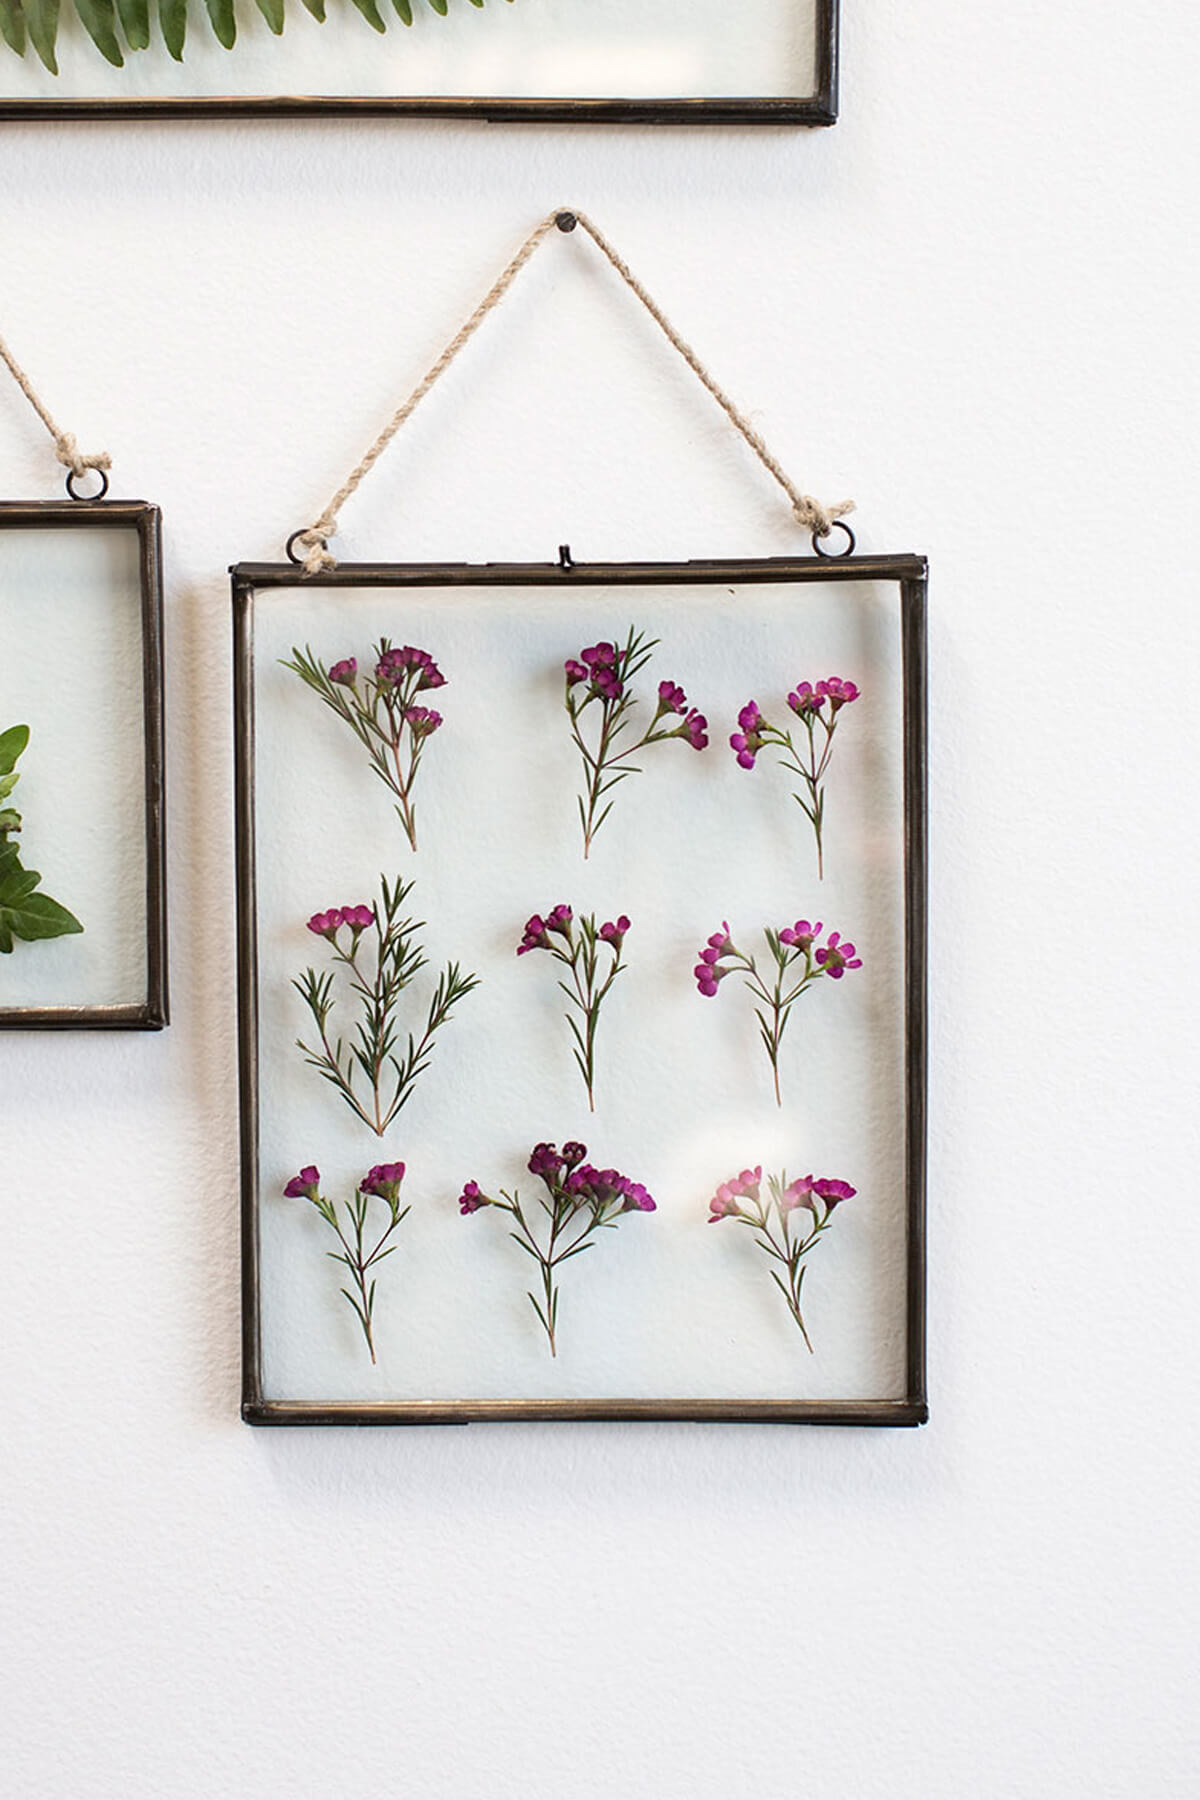 Pressed Flowers Change Color, and That's Okay! - Pressed Flower Shop